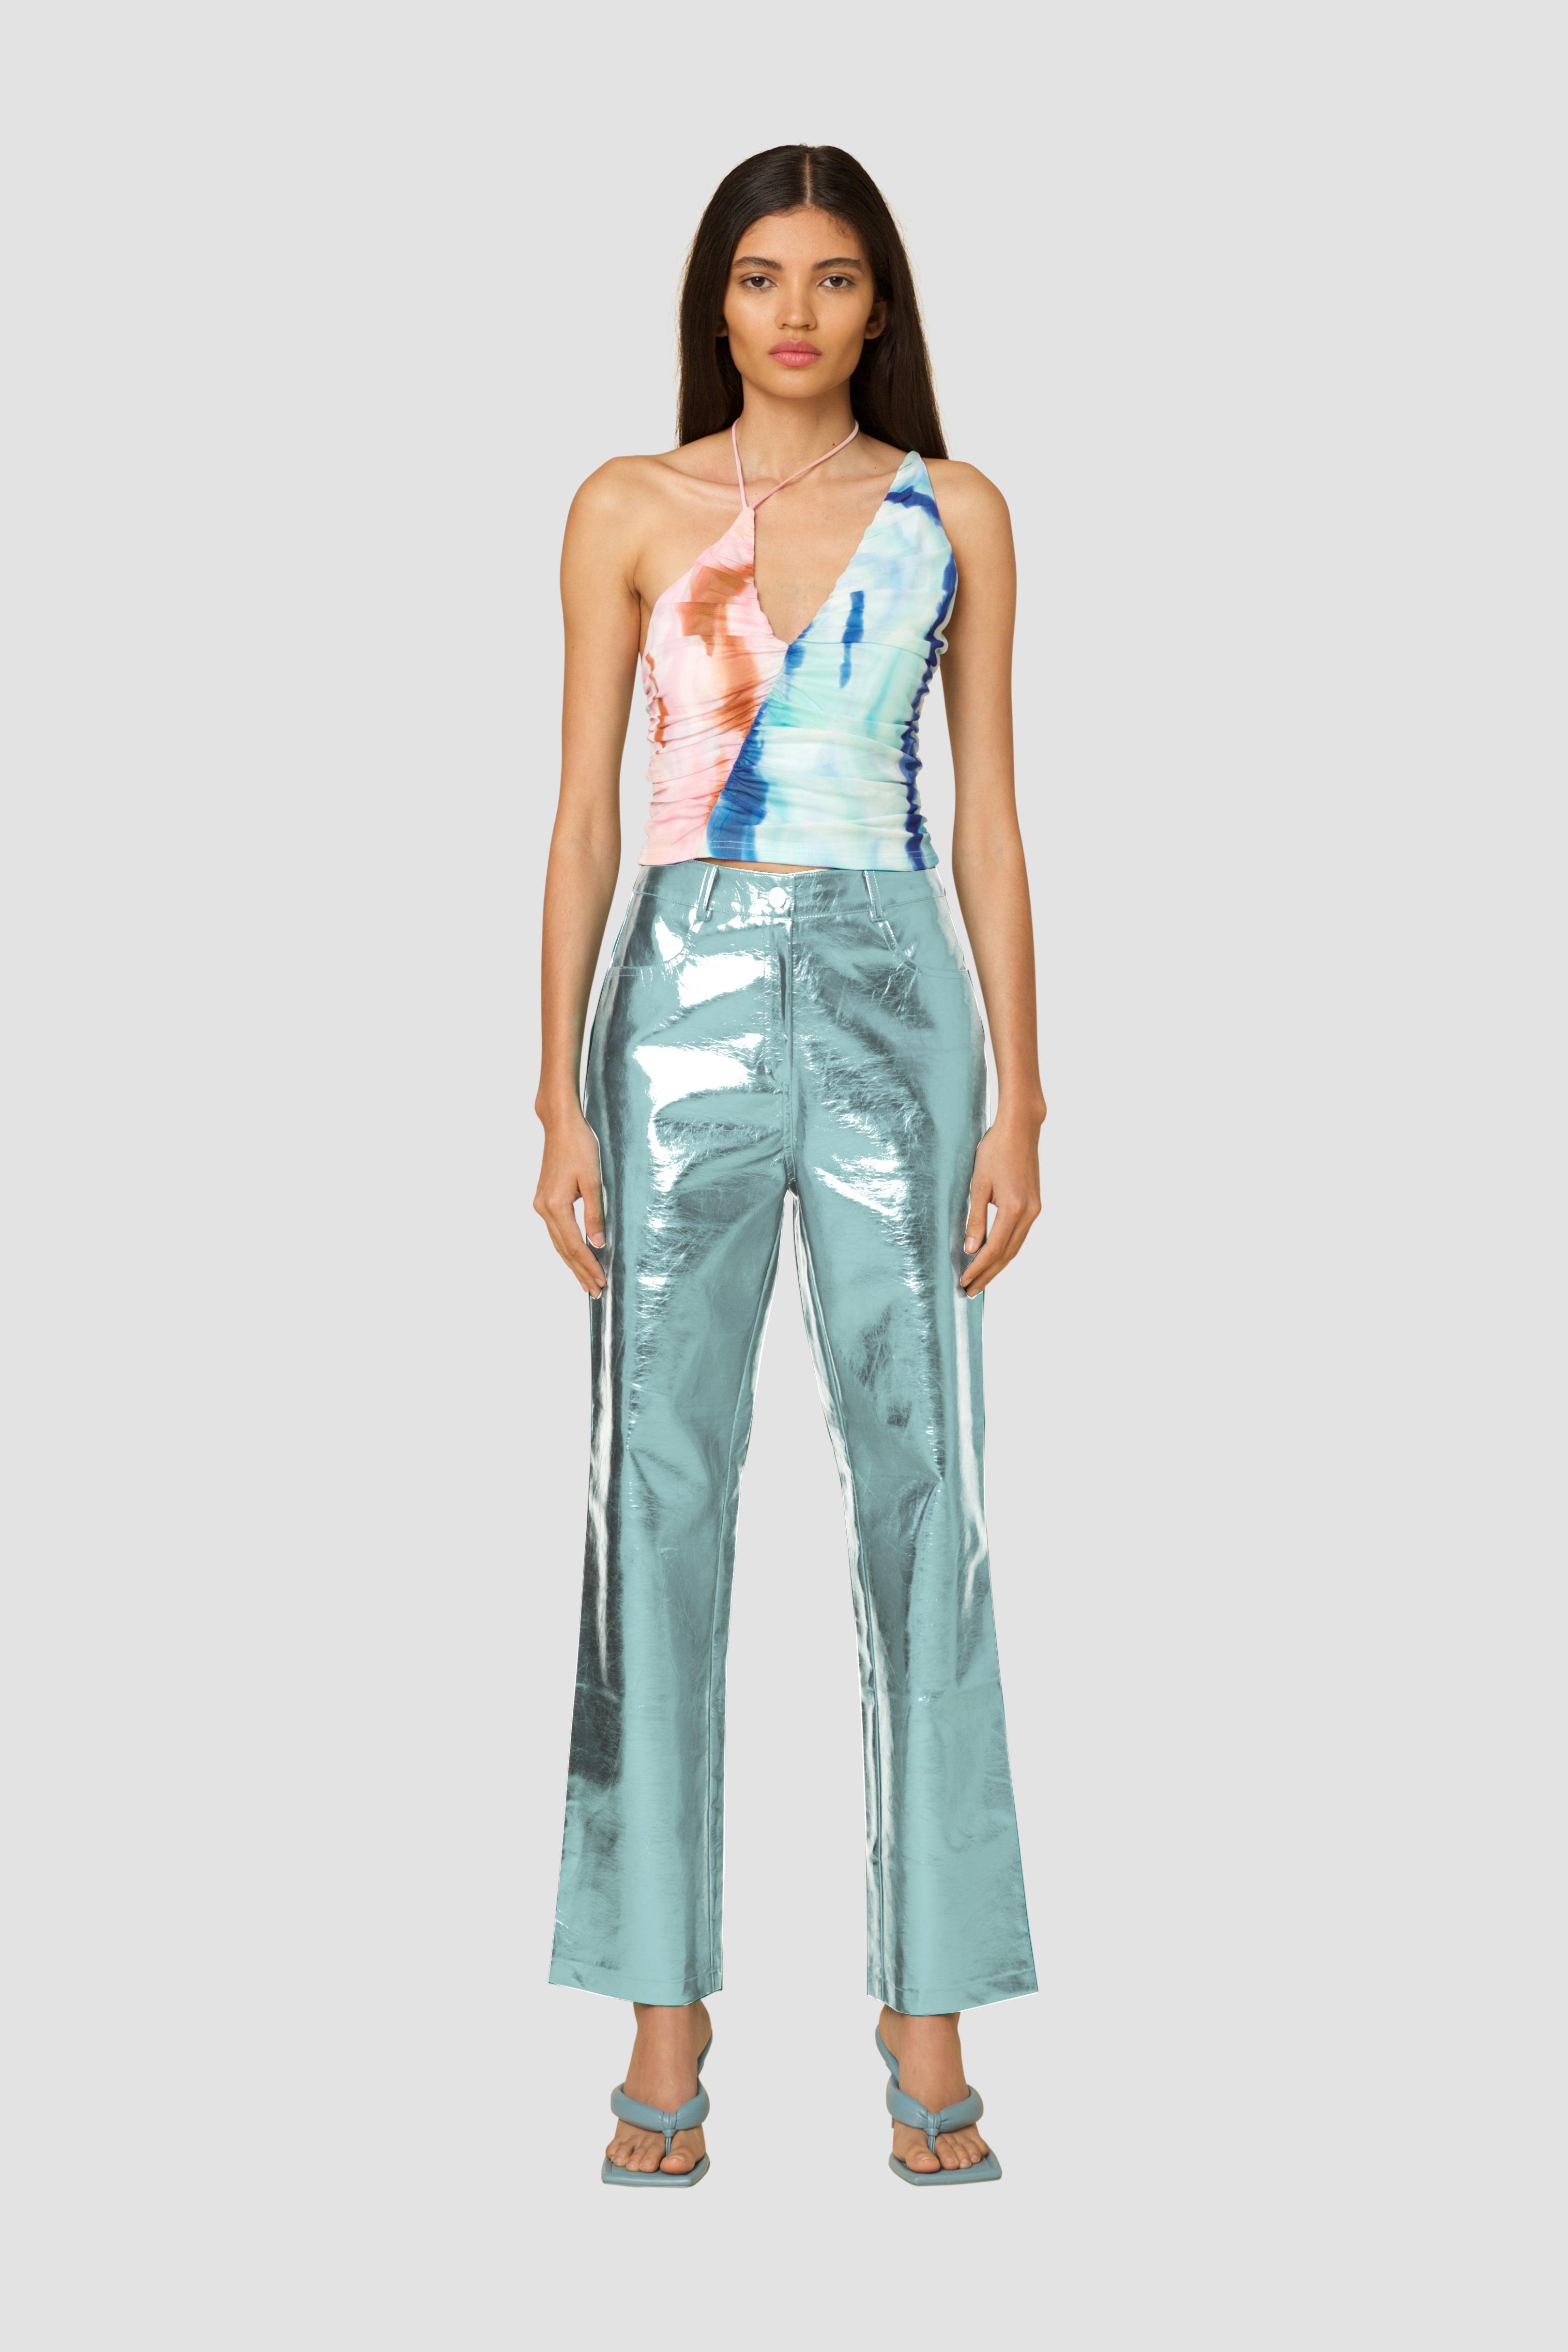 Amy Lynn Synthetic Lupe Ice Blue Metallic Trousers | Lyst